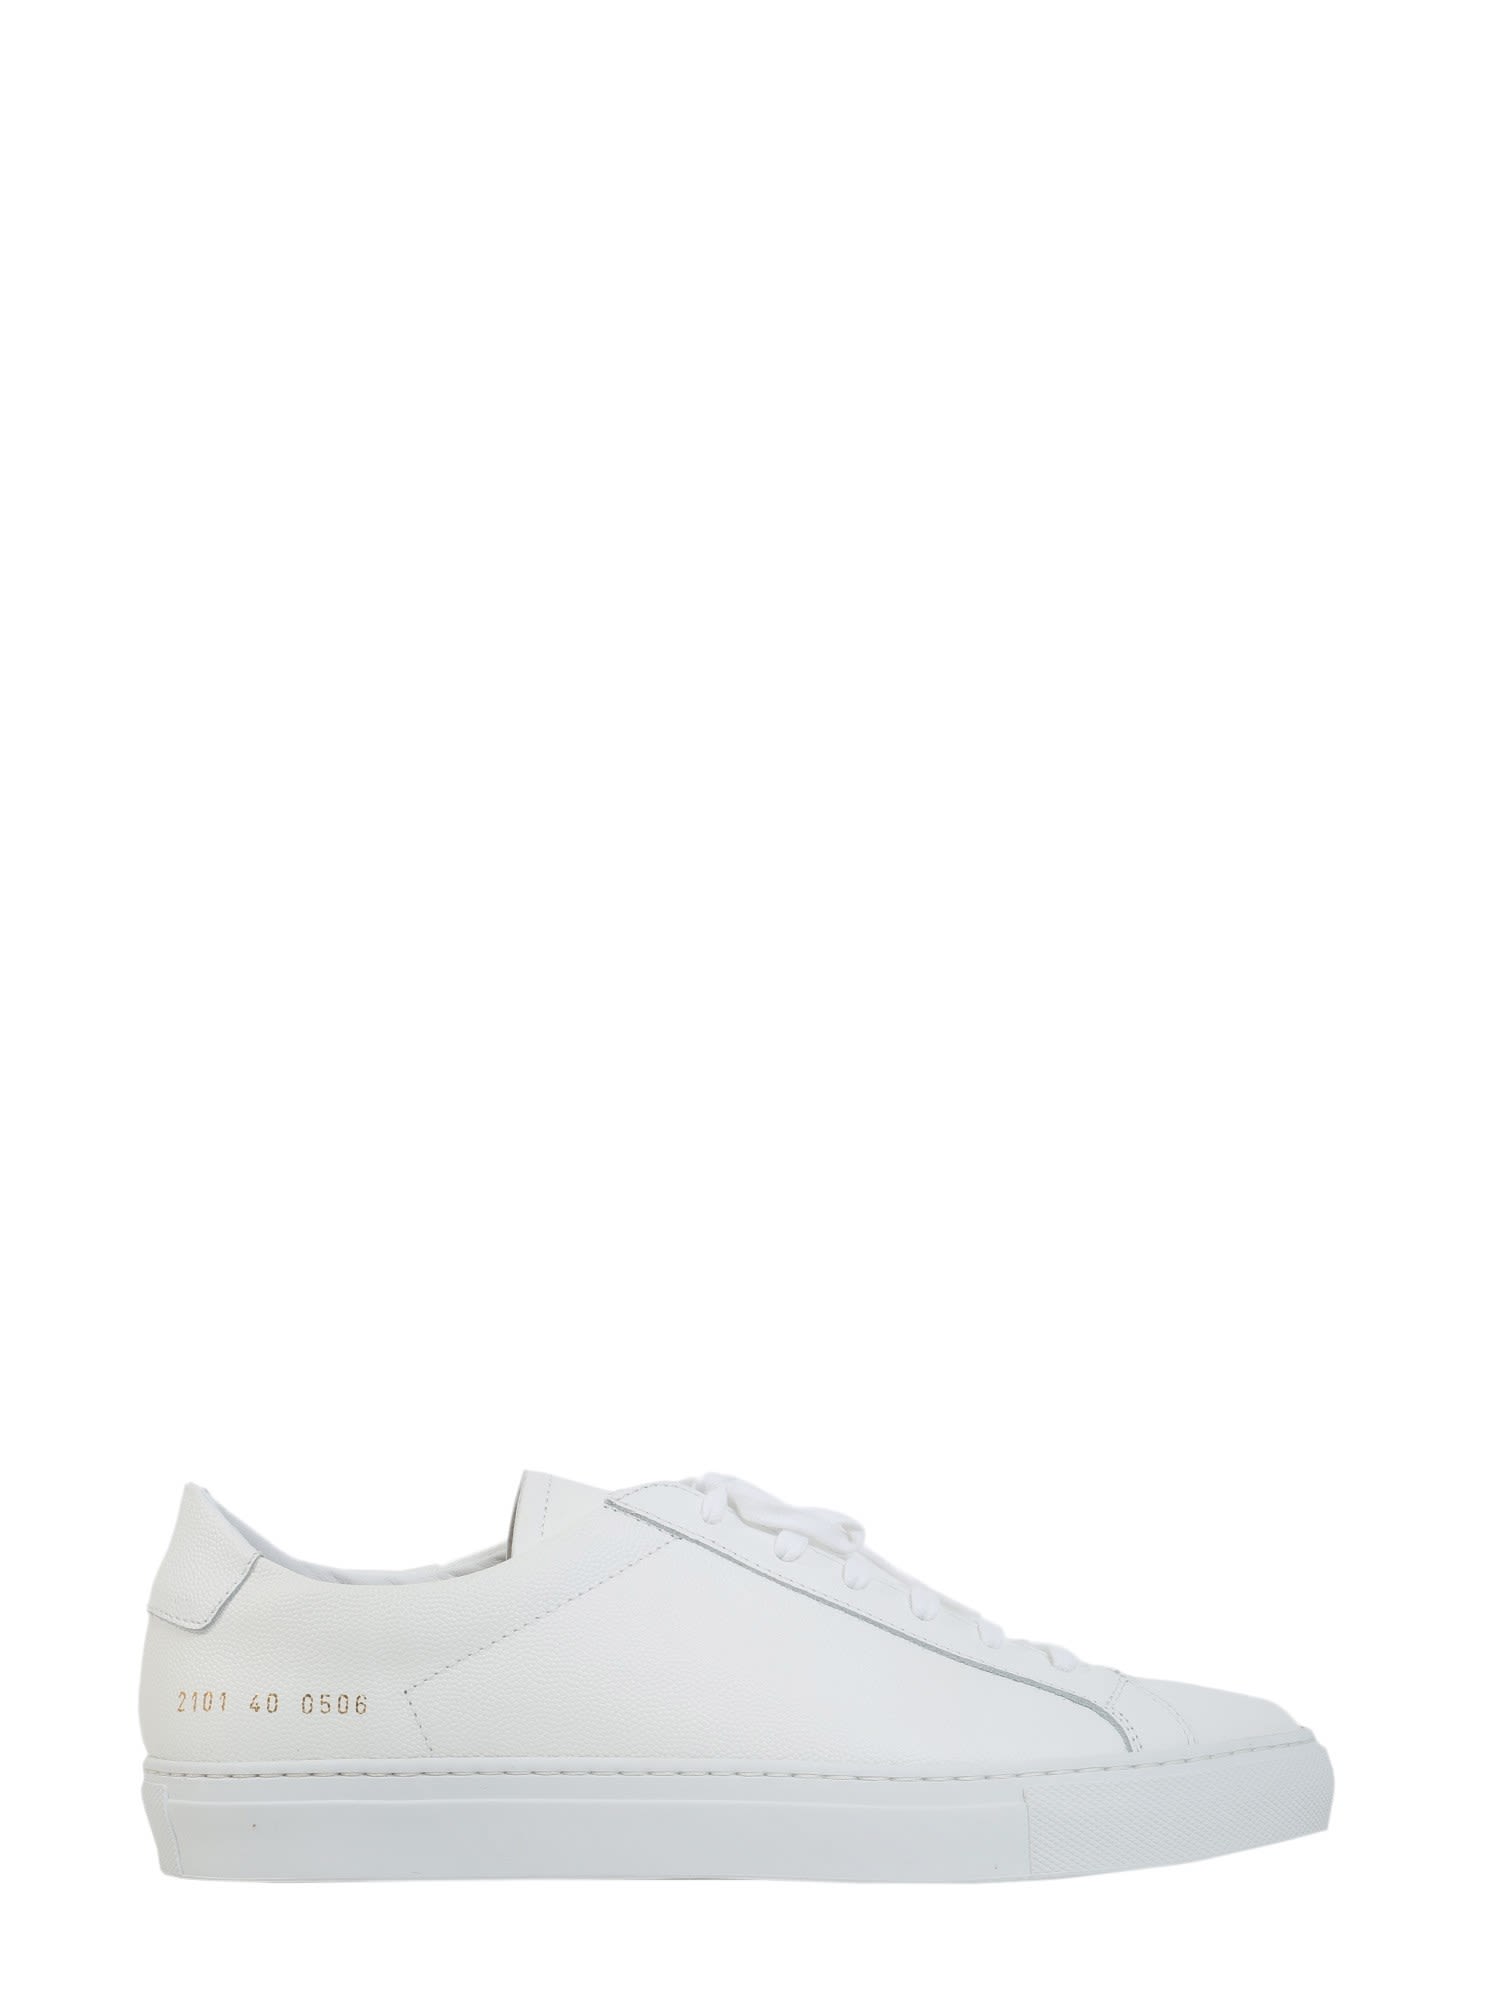 COMMON PROJECTS Achilles Premium Sneakers in Bianco | ModeSens